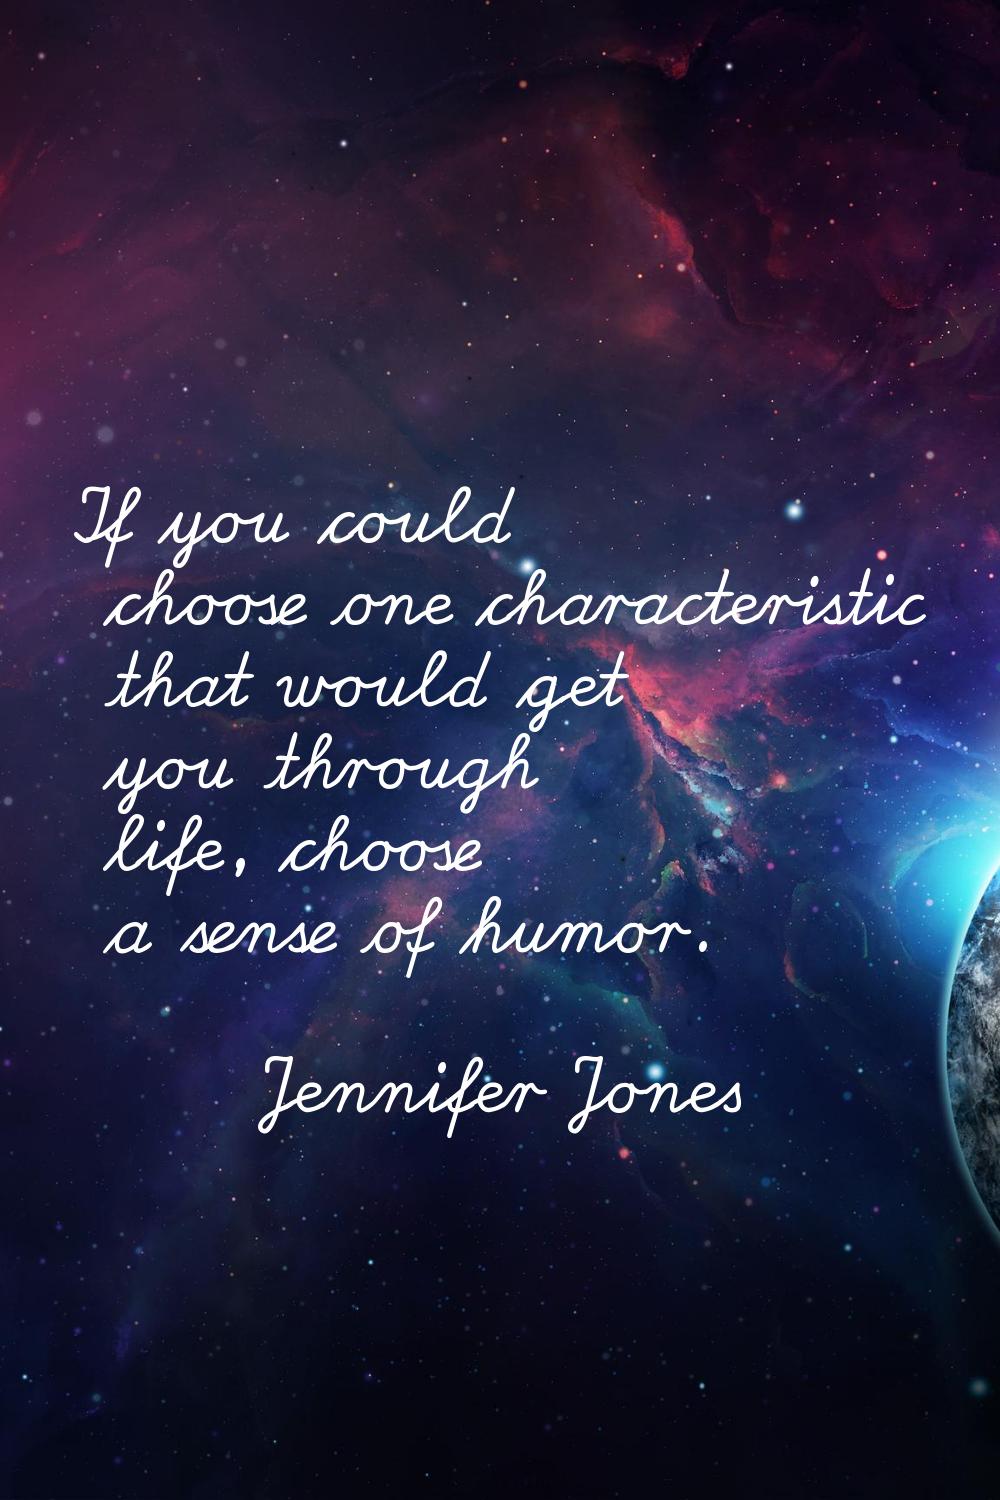 If you could choose one characteristic that would get you through life, choose a sense of humor.